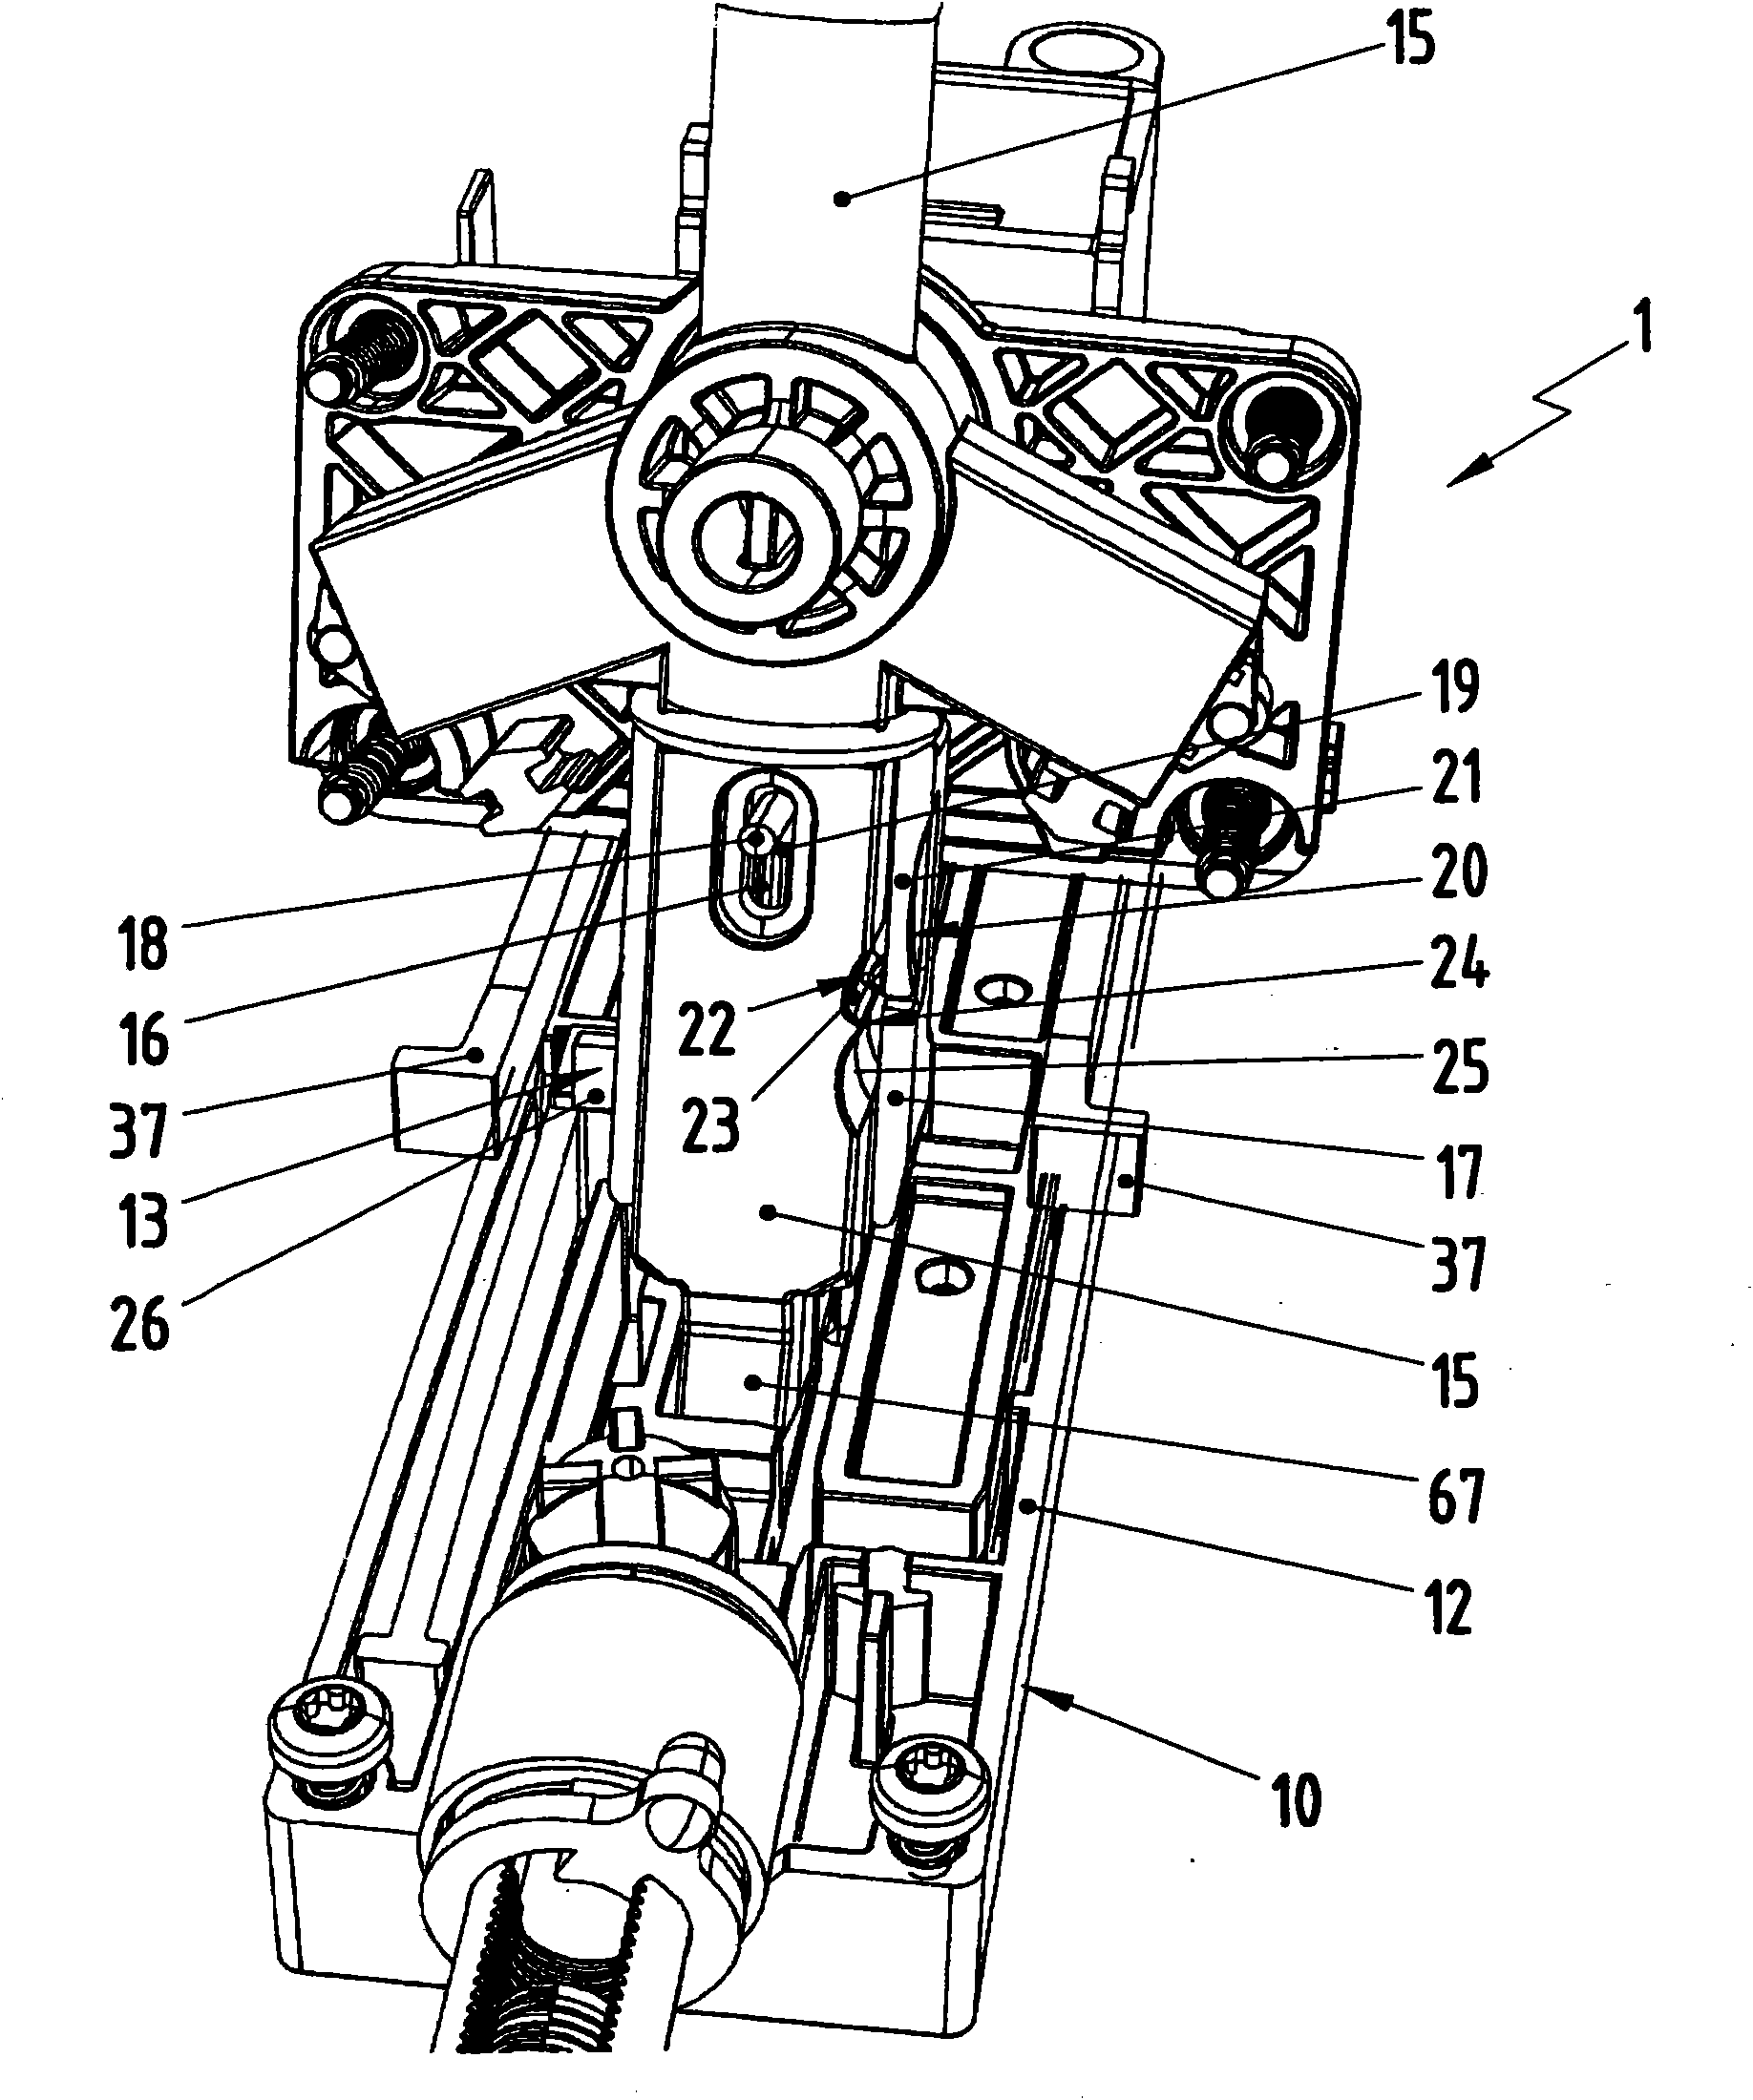 Gear-shifting device for automatic transmission